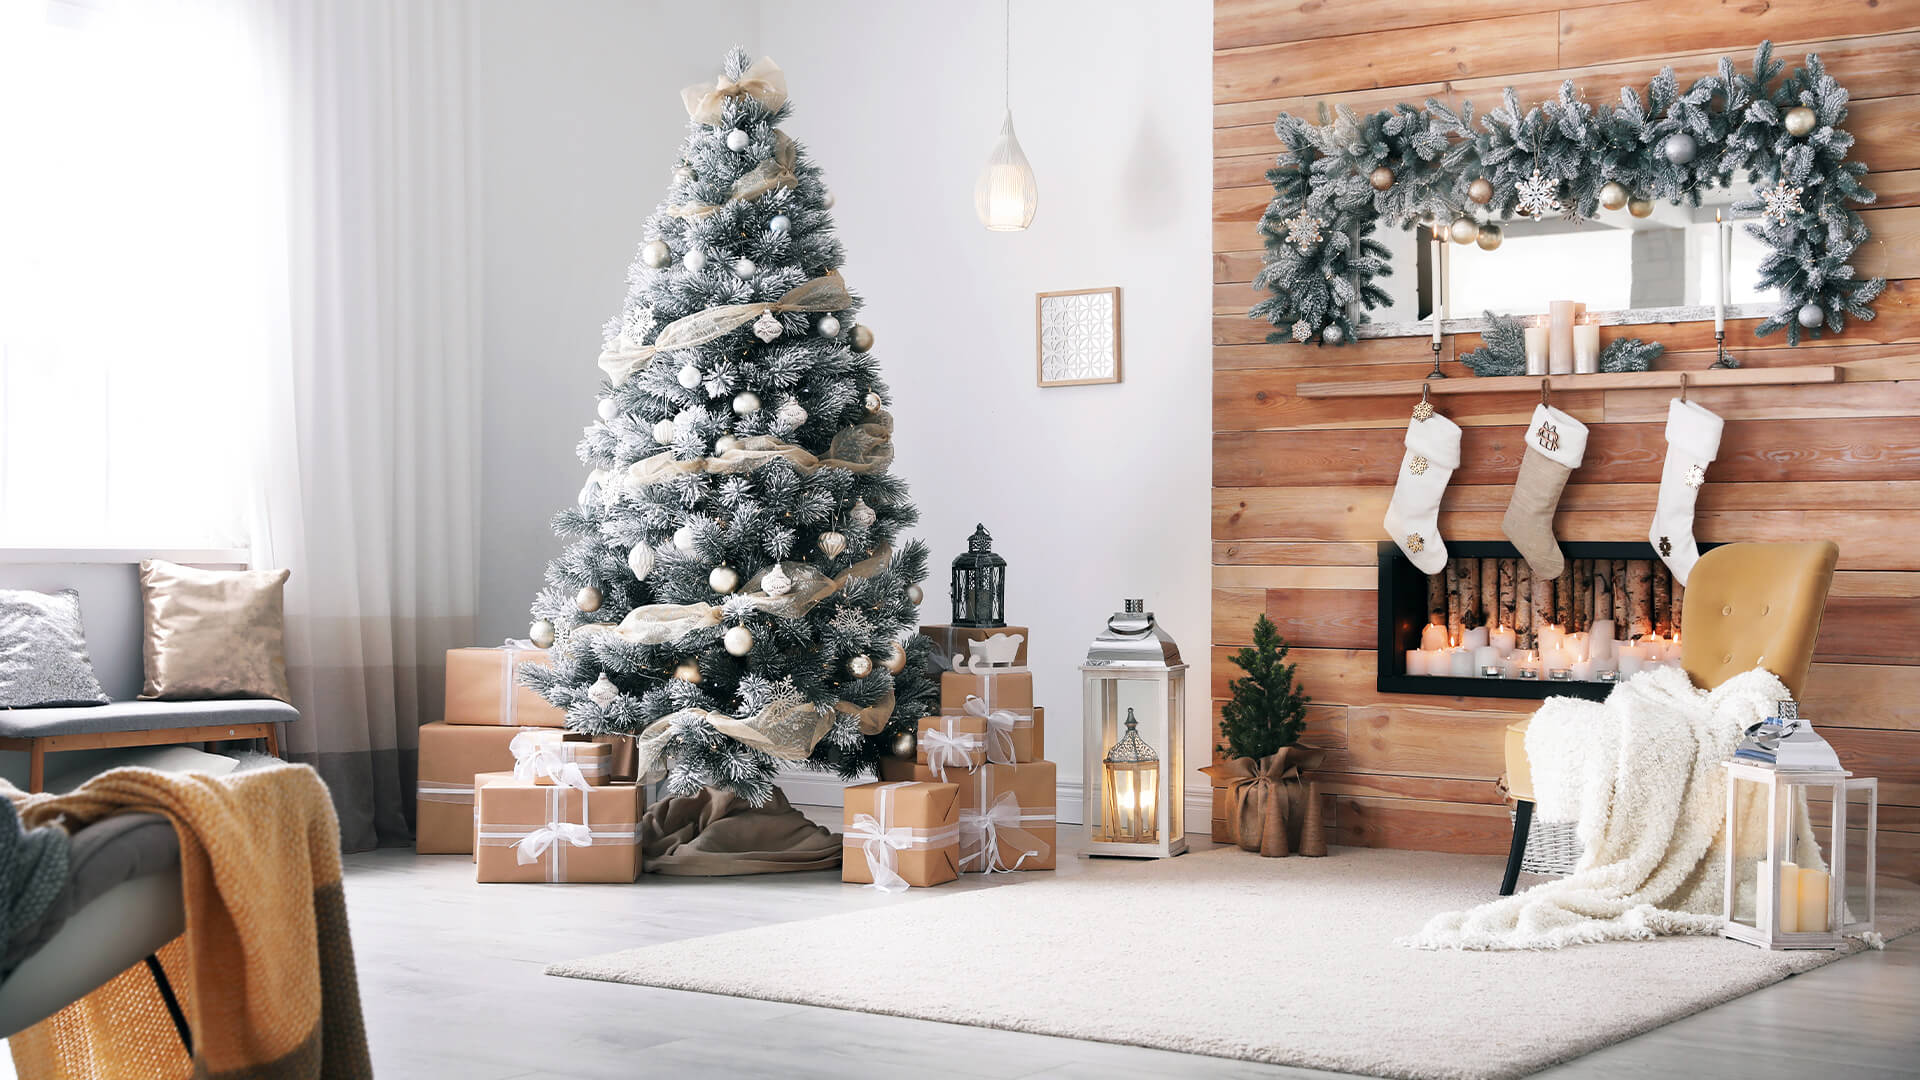 Recycle to Sparkle: DIY Christmas Home Décor Ideas Using Recycled ...